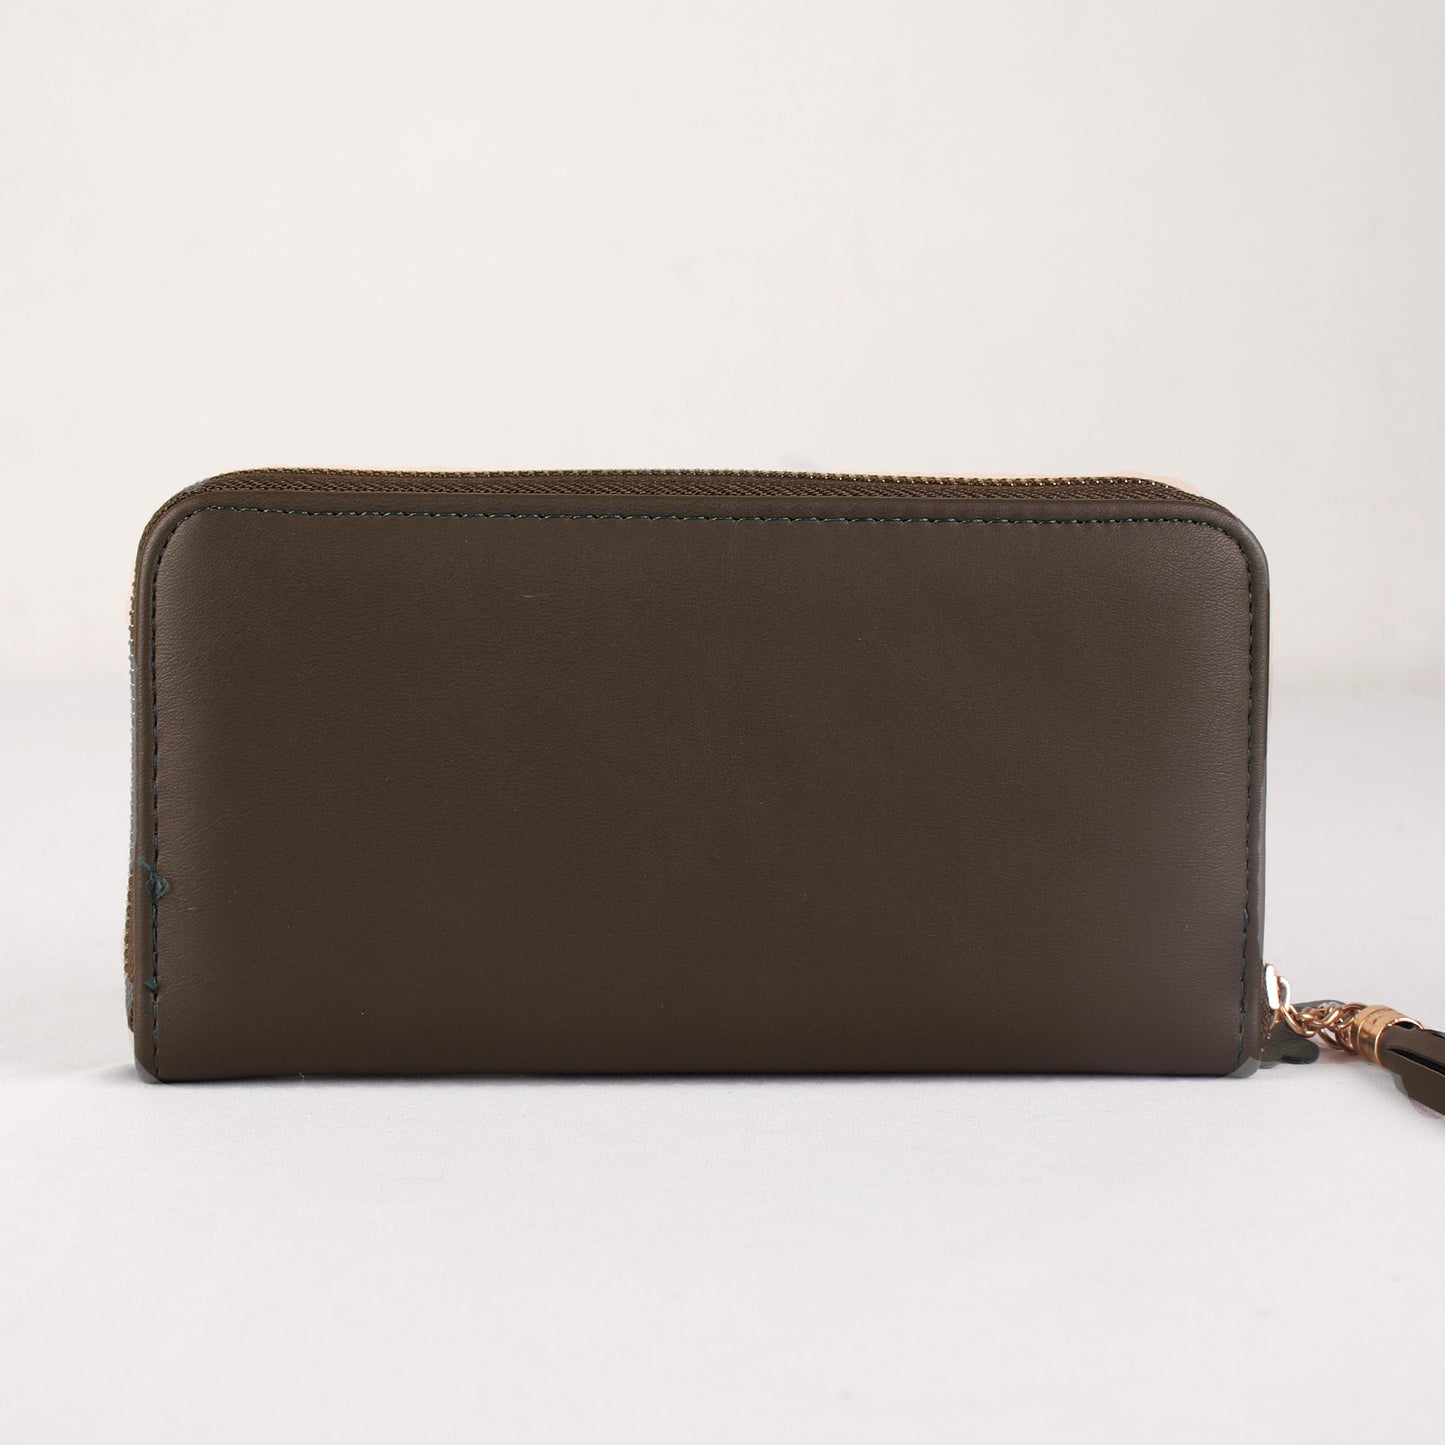 The Boxy inverted Clamped wallet with Tassels in Green